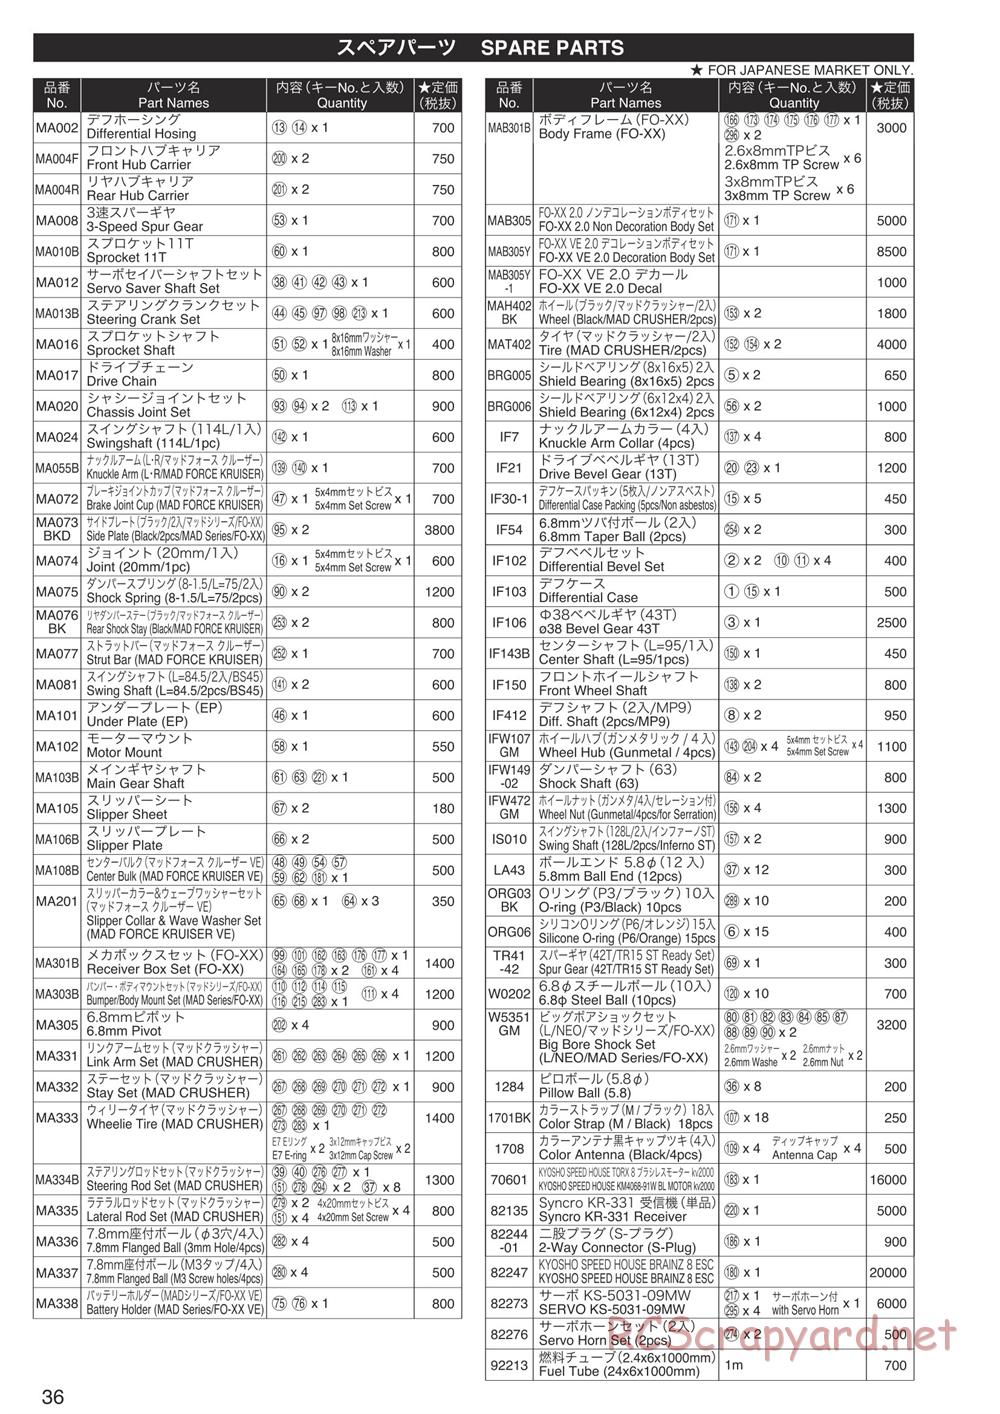 Kyosho - FO-XX VE 2.0 - Parts List - Page 1